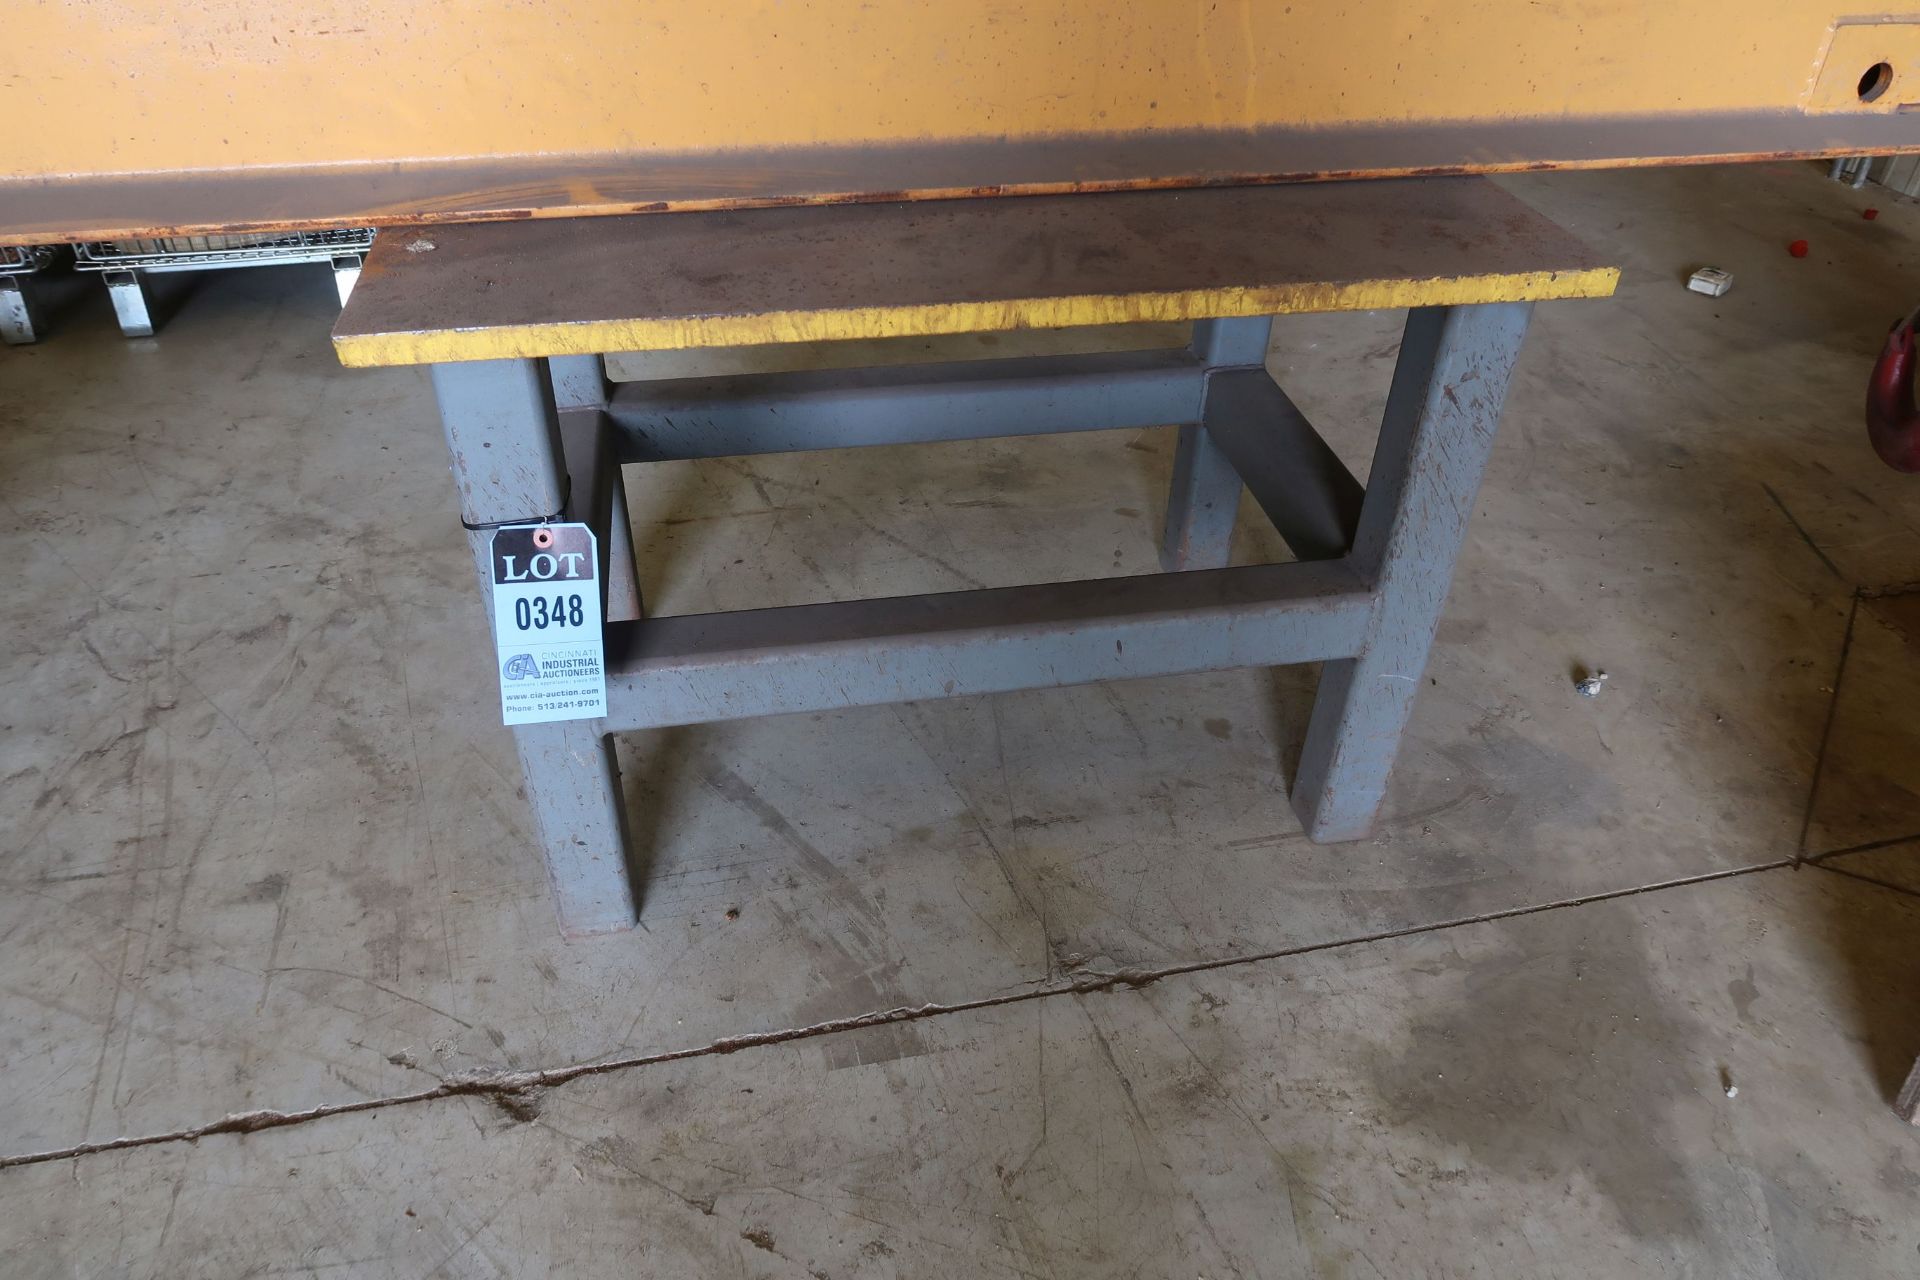 24" X 38" X 25-1/2" HIGH X 1" THICK STEEL TOP PLATE STRUCTUAL STEEL WELDED FRAME WELDING TABLE